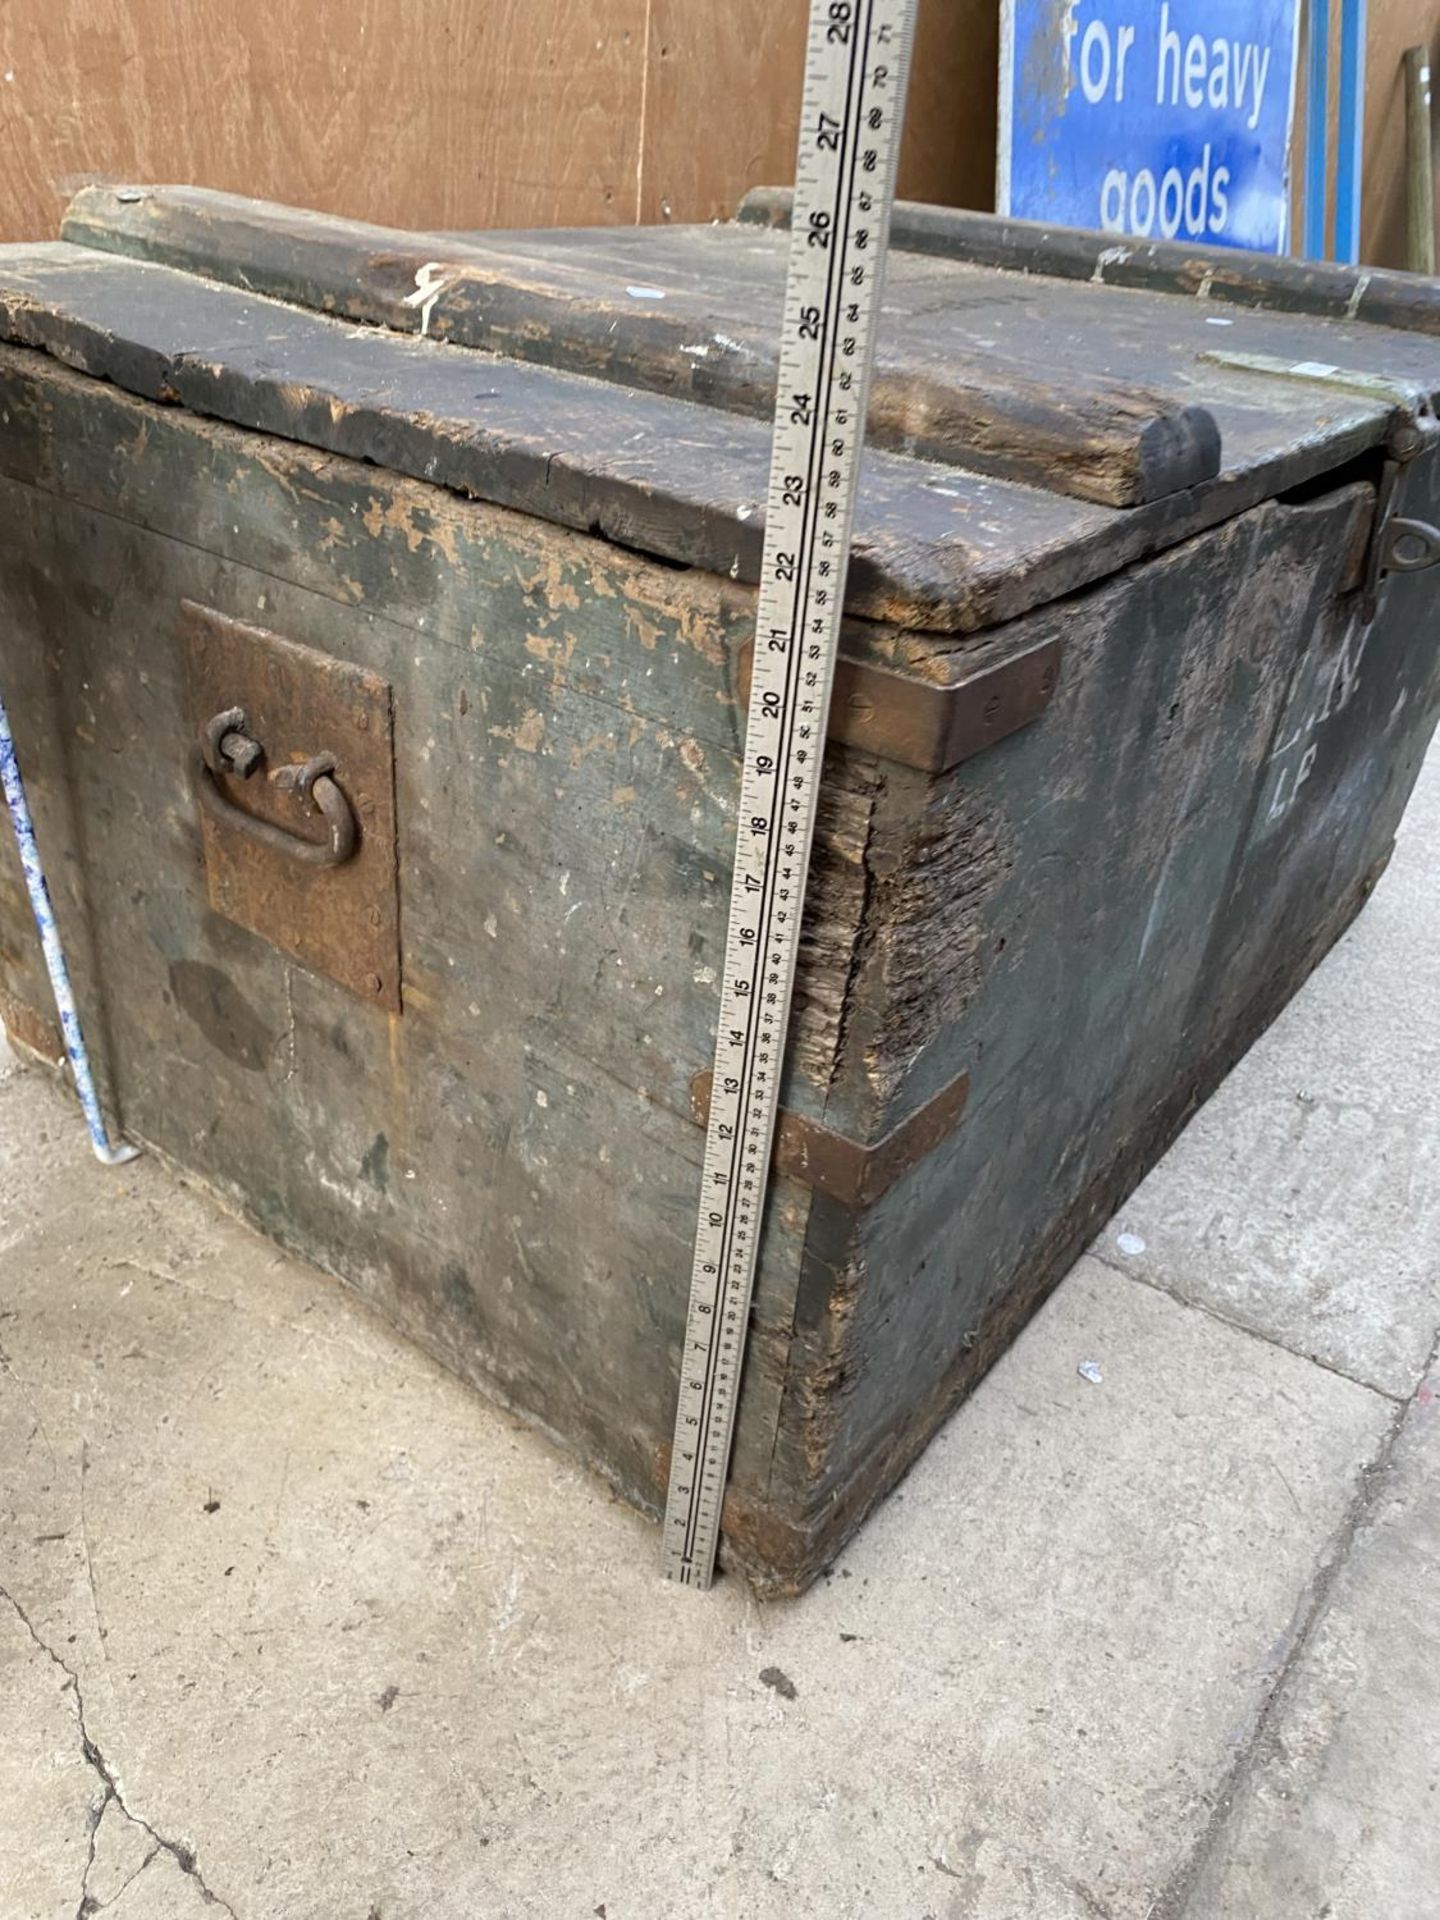 A LARGE VINTAGE WOODEN CHEST WITH METAL BANDING - Image 3 of 6